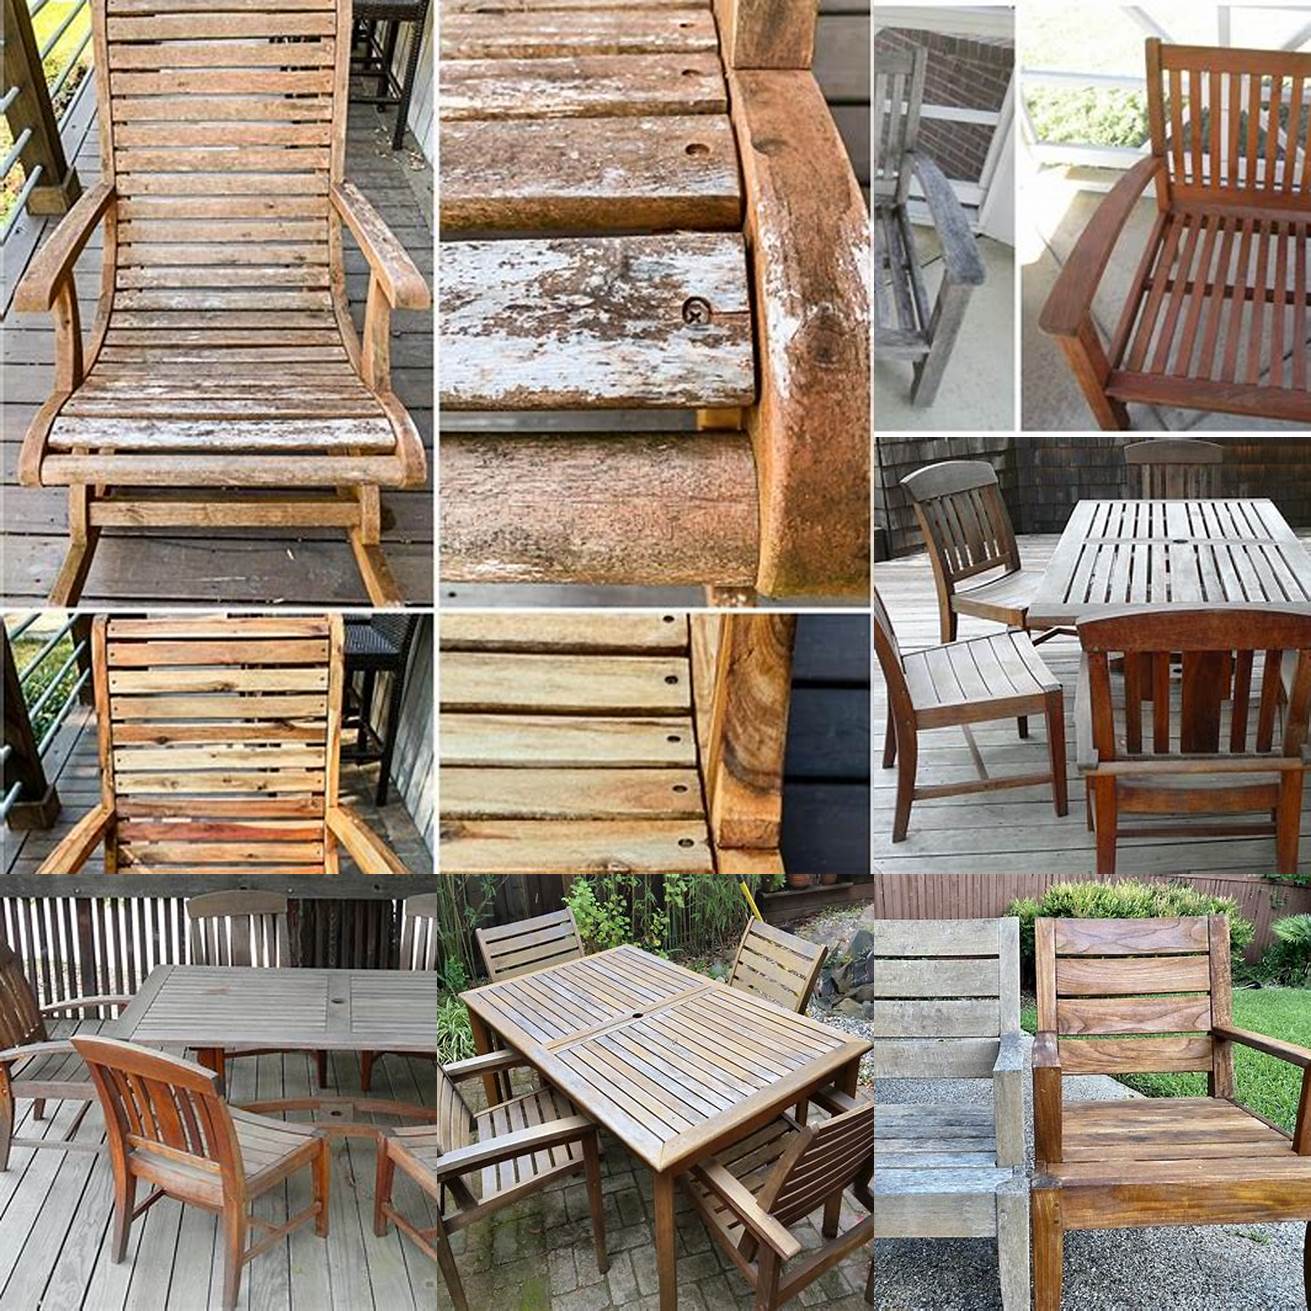 A picture of teak deck furniture before and after being cleaned